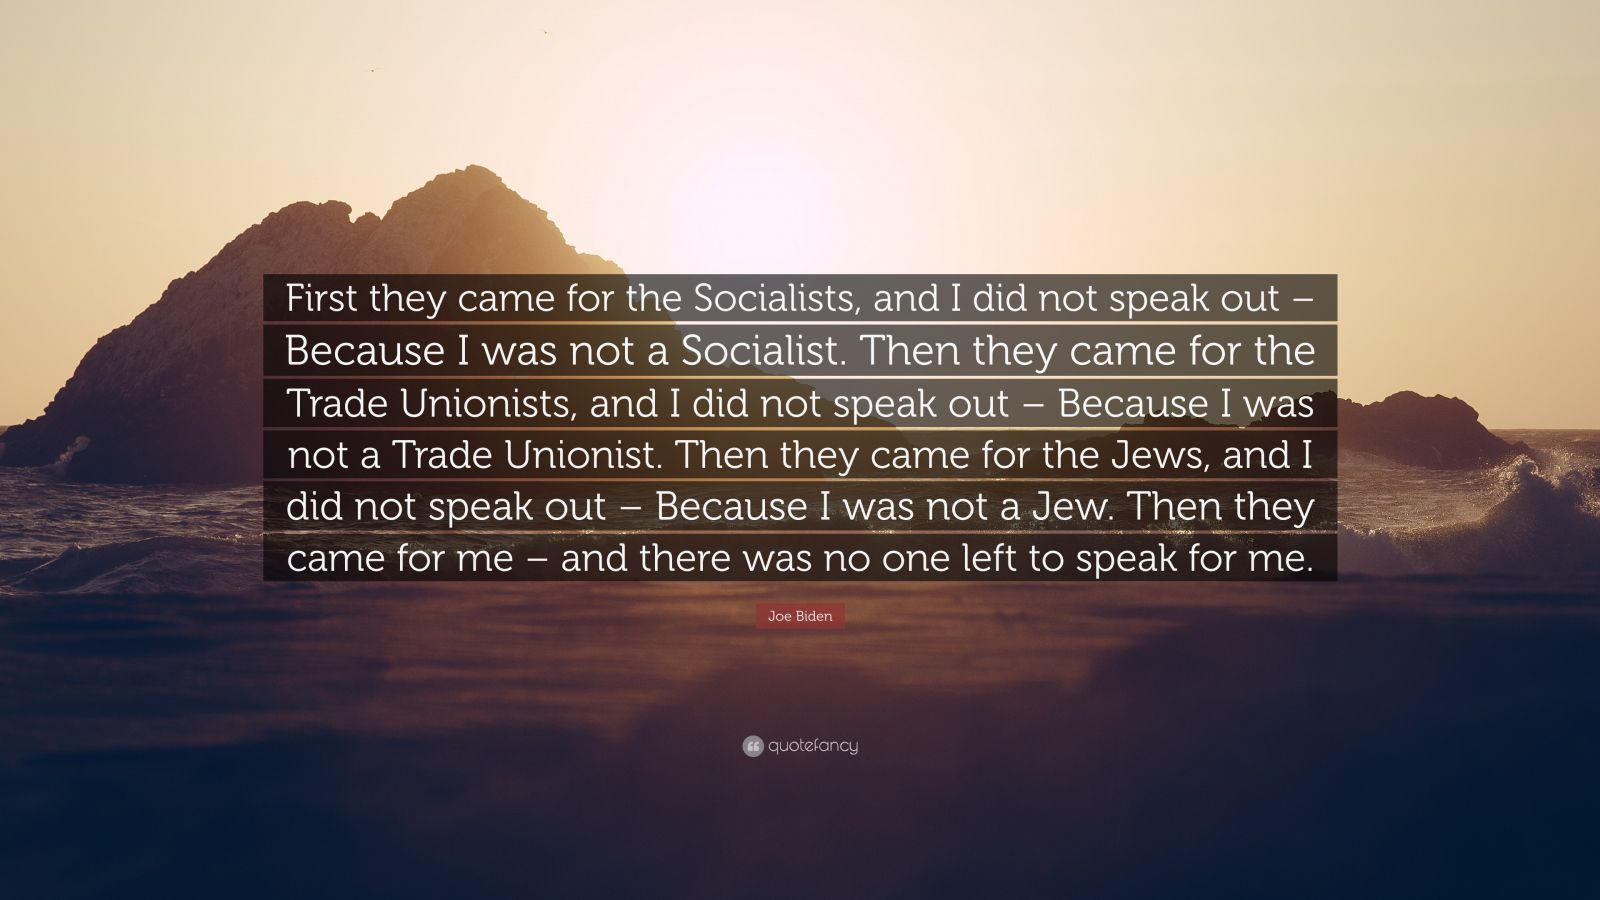 Joe Biden Quote: “First they came for the Socialists, and I did not